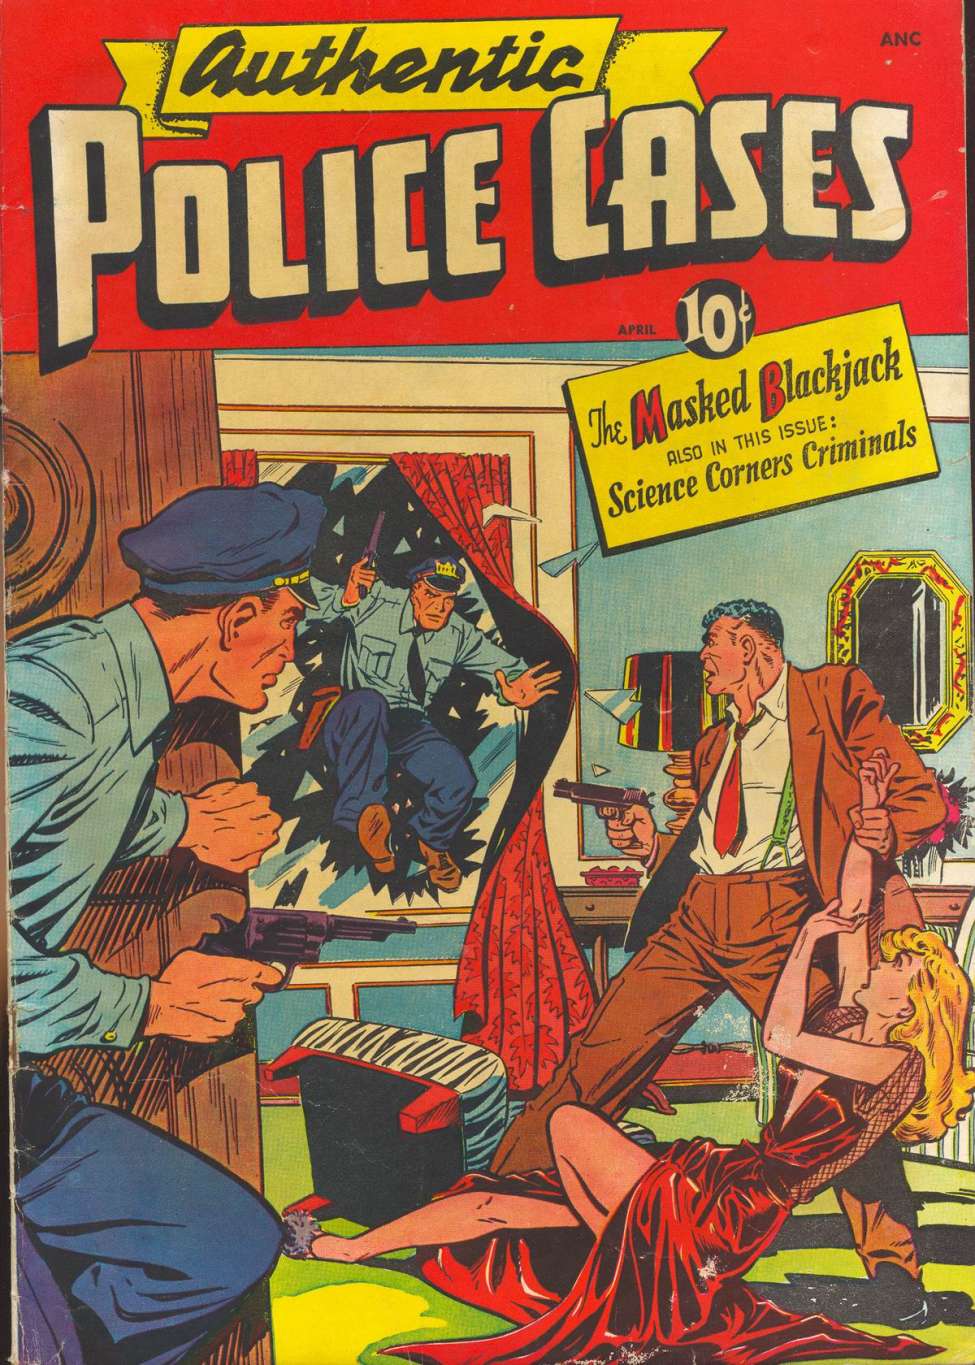 Comic Book Cover For Authentic Police Cases 7